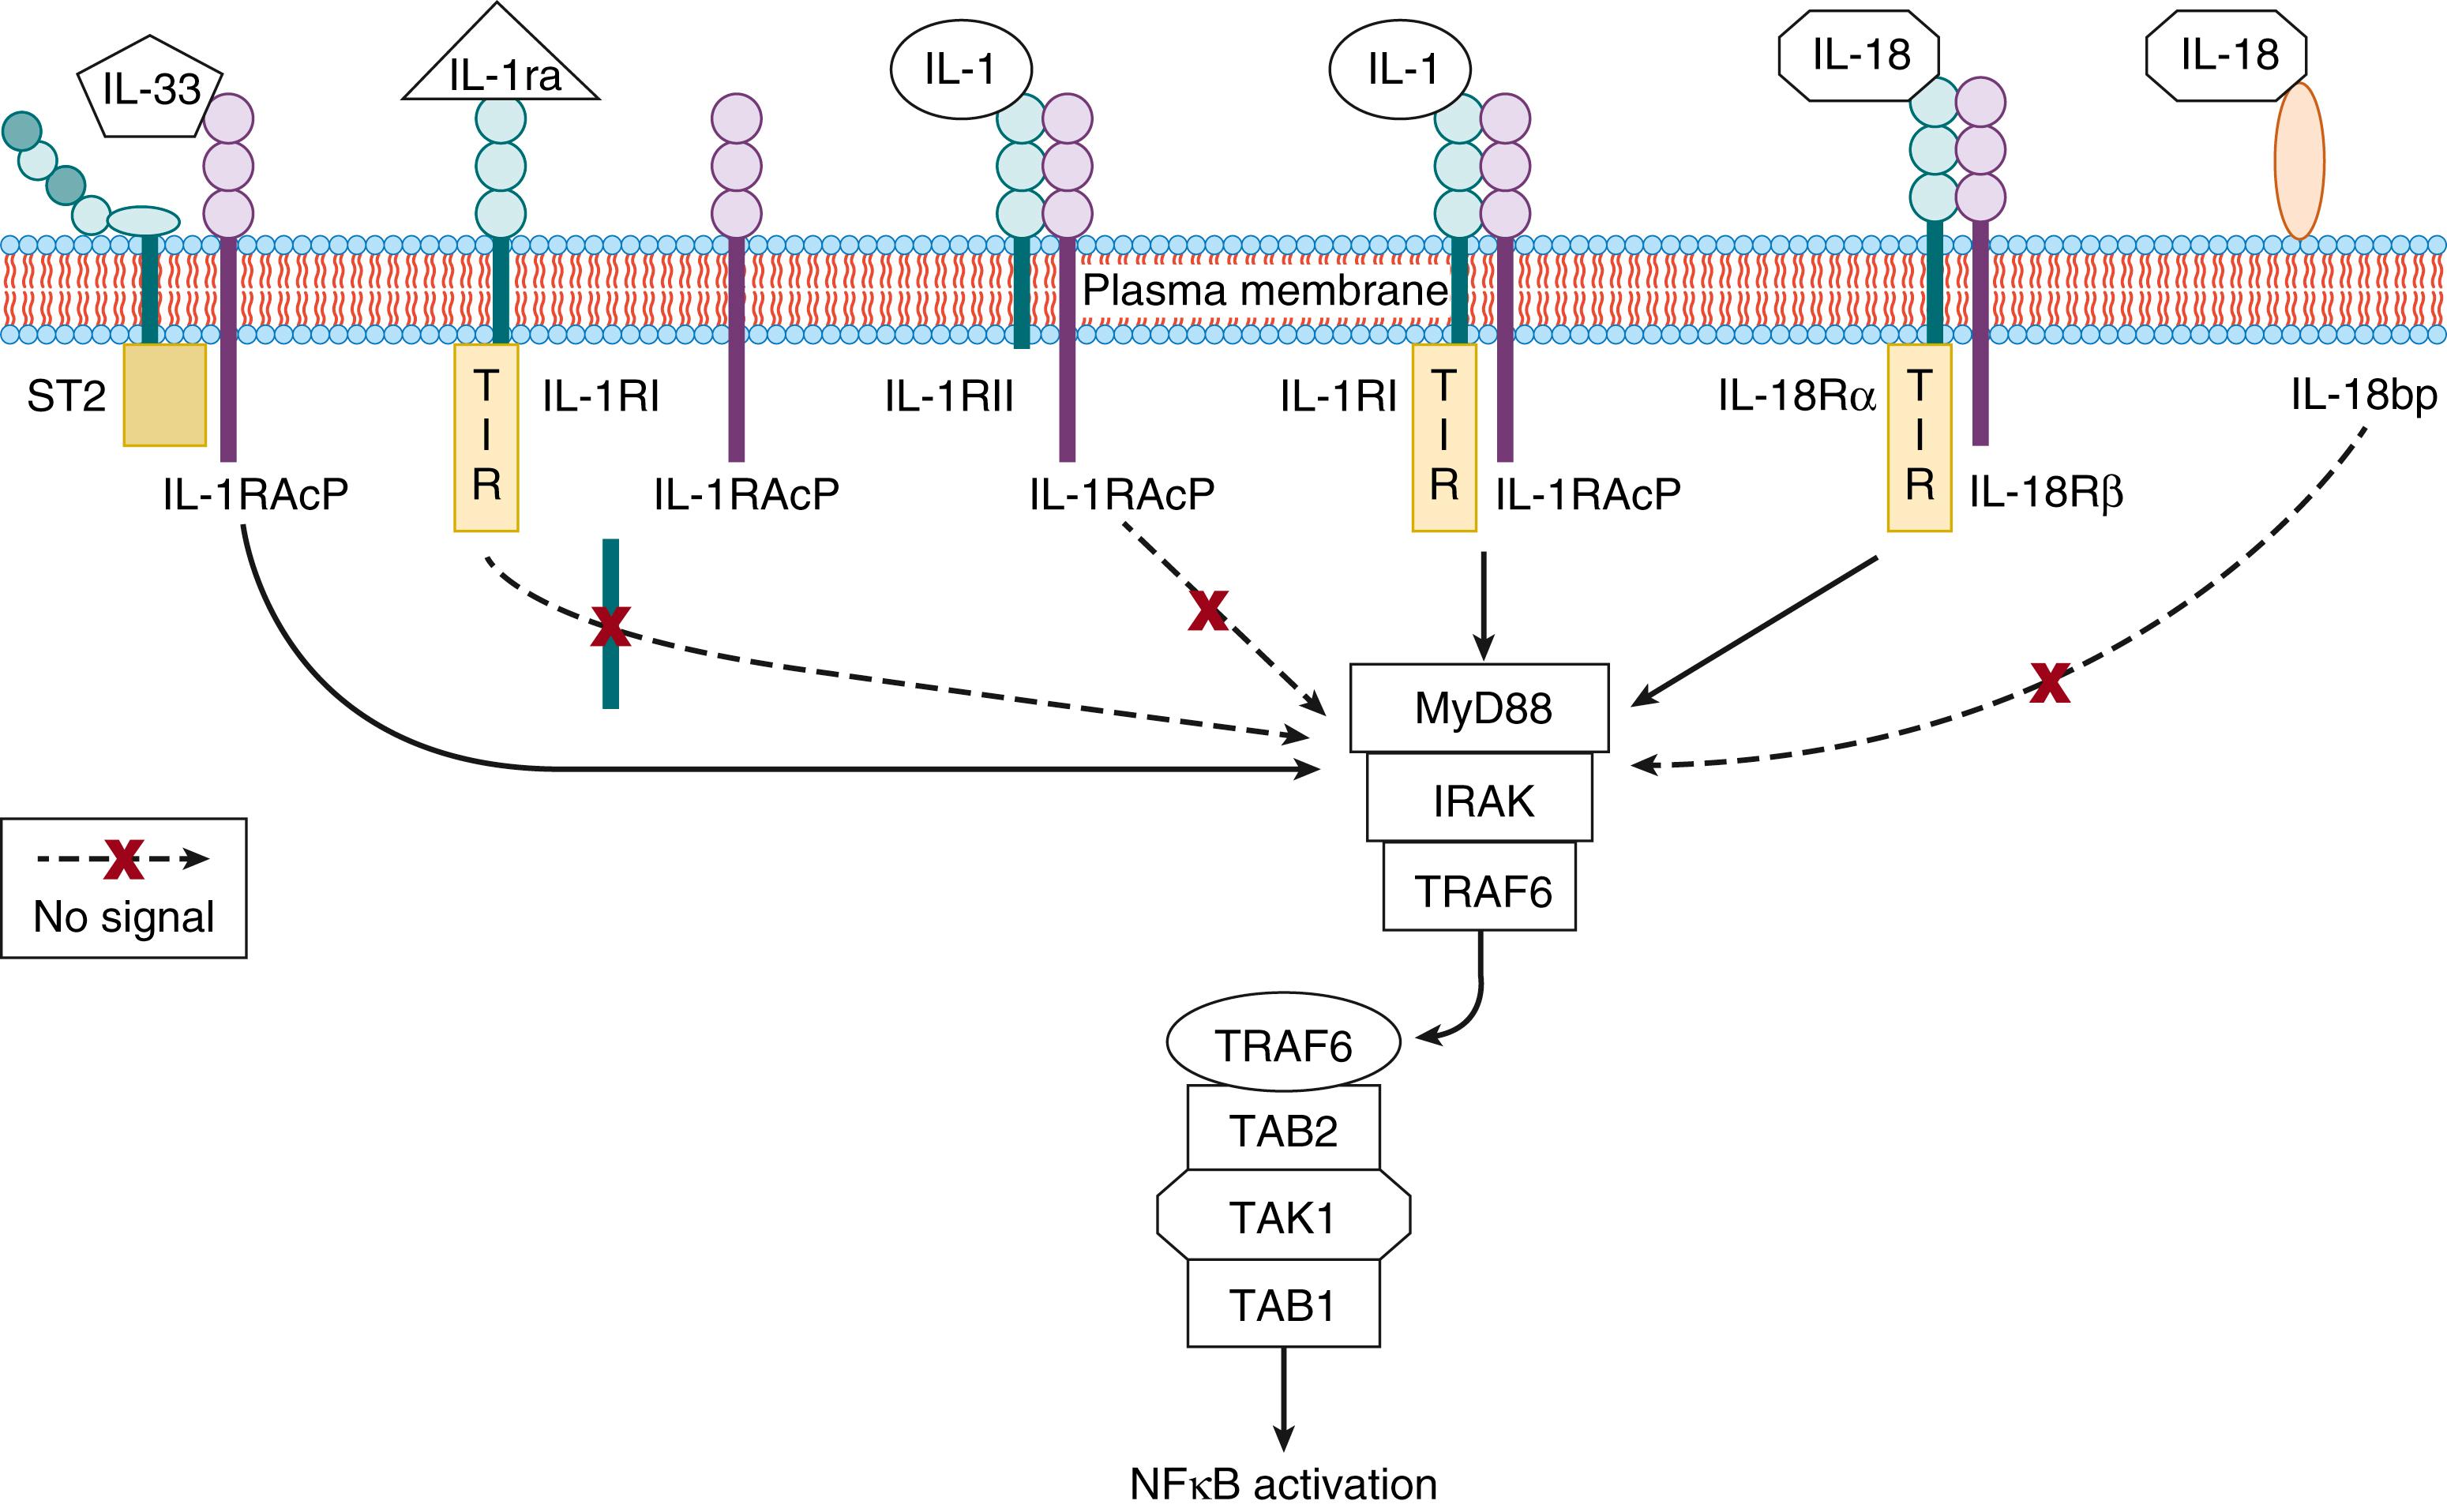 Fig. 121.2, Interkeulin-1 (IL-1) and interkeulin-18 (IL-18) receptor family. The IL-1 and IL-18 receptors are members of the IL-1/toll-like receptor family. IL-1 can bind to either the type I IL-1 receptor (IL-1RI) or the type II IL-1R (IL-1RII) . IL-1 binding to IL-1RI results in the association of IL-1R accessory protein (IL-1RAcP) to form a complex that recruits the myeloid differentiation protein 88 (MyD88) to the toll/IL-1 receptor (TIR) domain, activation of the MyD88 signaling cascade, and subsequent activation of nuclear factor κB (NFκB) and proinflammatory gene transcription. Members of the IL-1RI signaling complex include MyD88, IL-1R-associated kinase (IRAK) , tumor necrosis factor receptor–associated factor 6 (TRAF6) , transforming growth factor β–kinase (TAK-1) , TAK-1-binding protein 1 (TAB-1) , and TAK-1-binding protein 2 (TAB-2) . IL-1 receptor antagonist (IL-1ra) also binds to IL-1RI but does not trigger the association of IL-1RAcP and activation of the MyD88 signaling cascade. IL-1RII can bind IL-1, but binding does not result in the formation of a signaling complex. IL-1RII lacks the TIR domain and may act as a decoy receptor. IL-18 is also a member of the IL-1/toll-like receptor family. IL-18 binding to IL-18Rα triggers the association of IL-18Rβ and activation of the MyD88 signaling cascade. IL-18 can also bind to IL-18 binding protein (IL-18bp) , a soluble inhibitor that prevents IL-18 interaction with the IL-18 receptor. Interleukin-33 (IL-33) binds to the ST2 receptor, which associates with IL-1RAcP and activates the MyD88 signaling pathway.